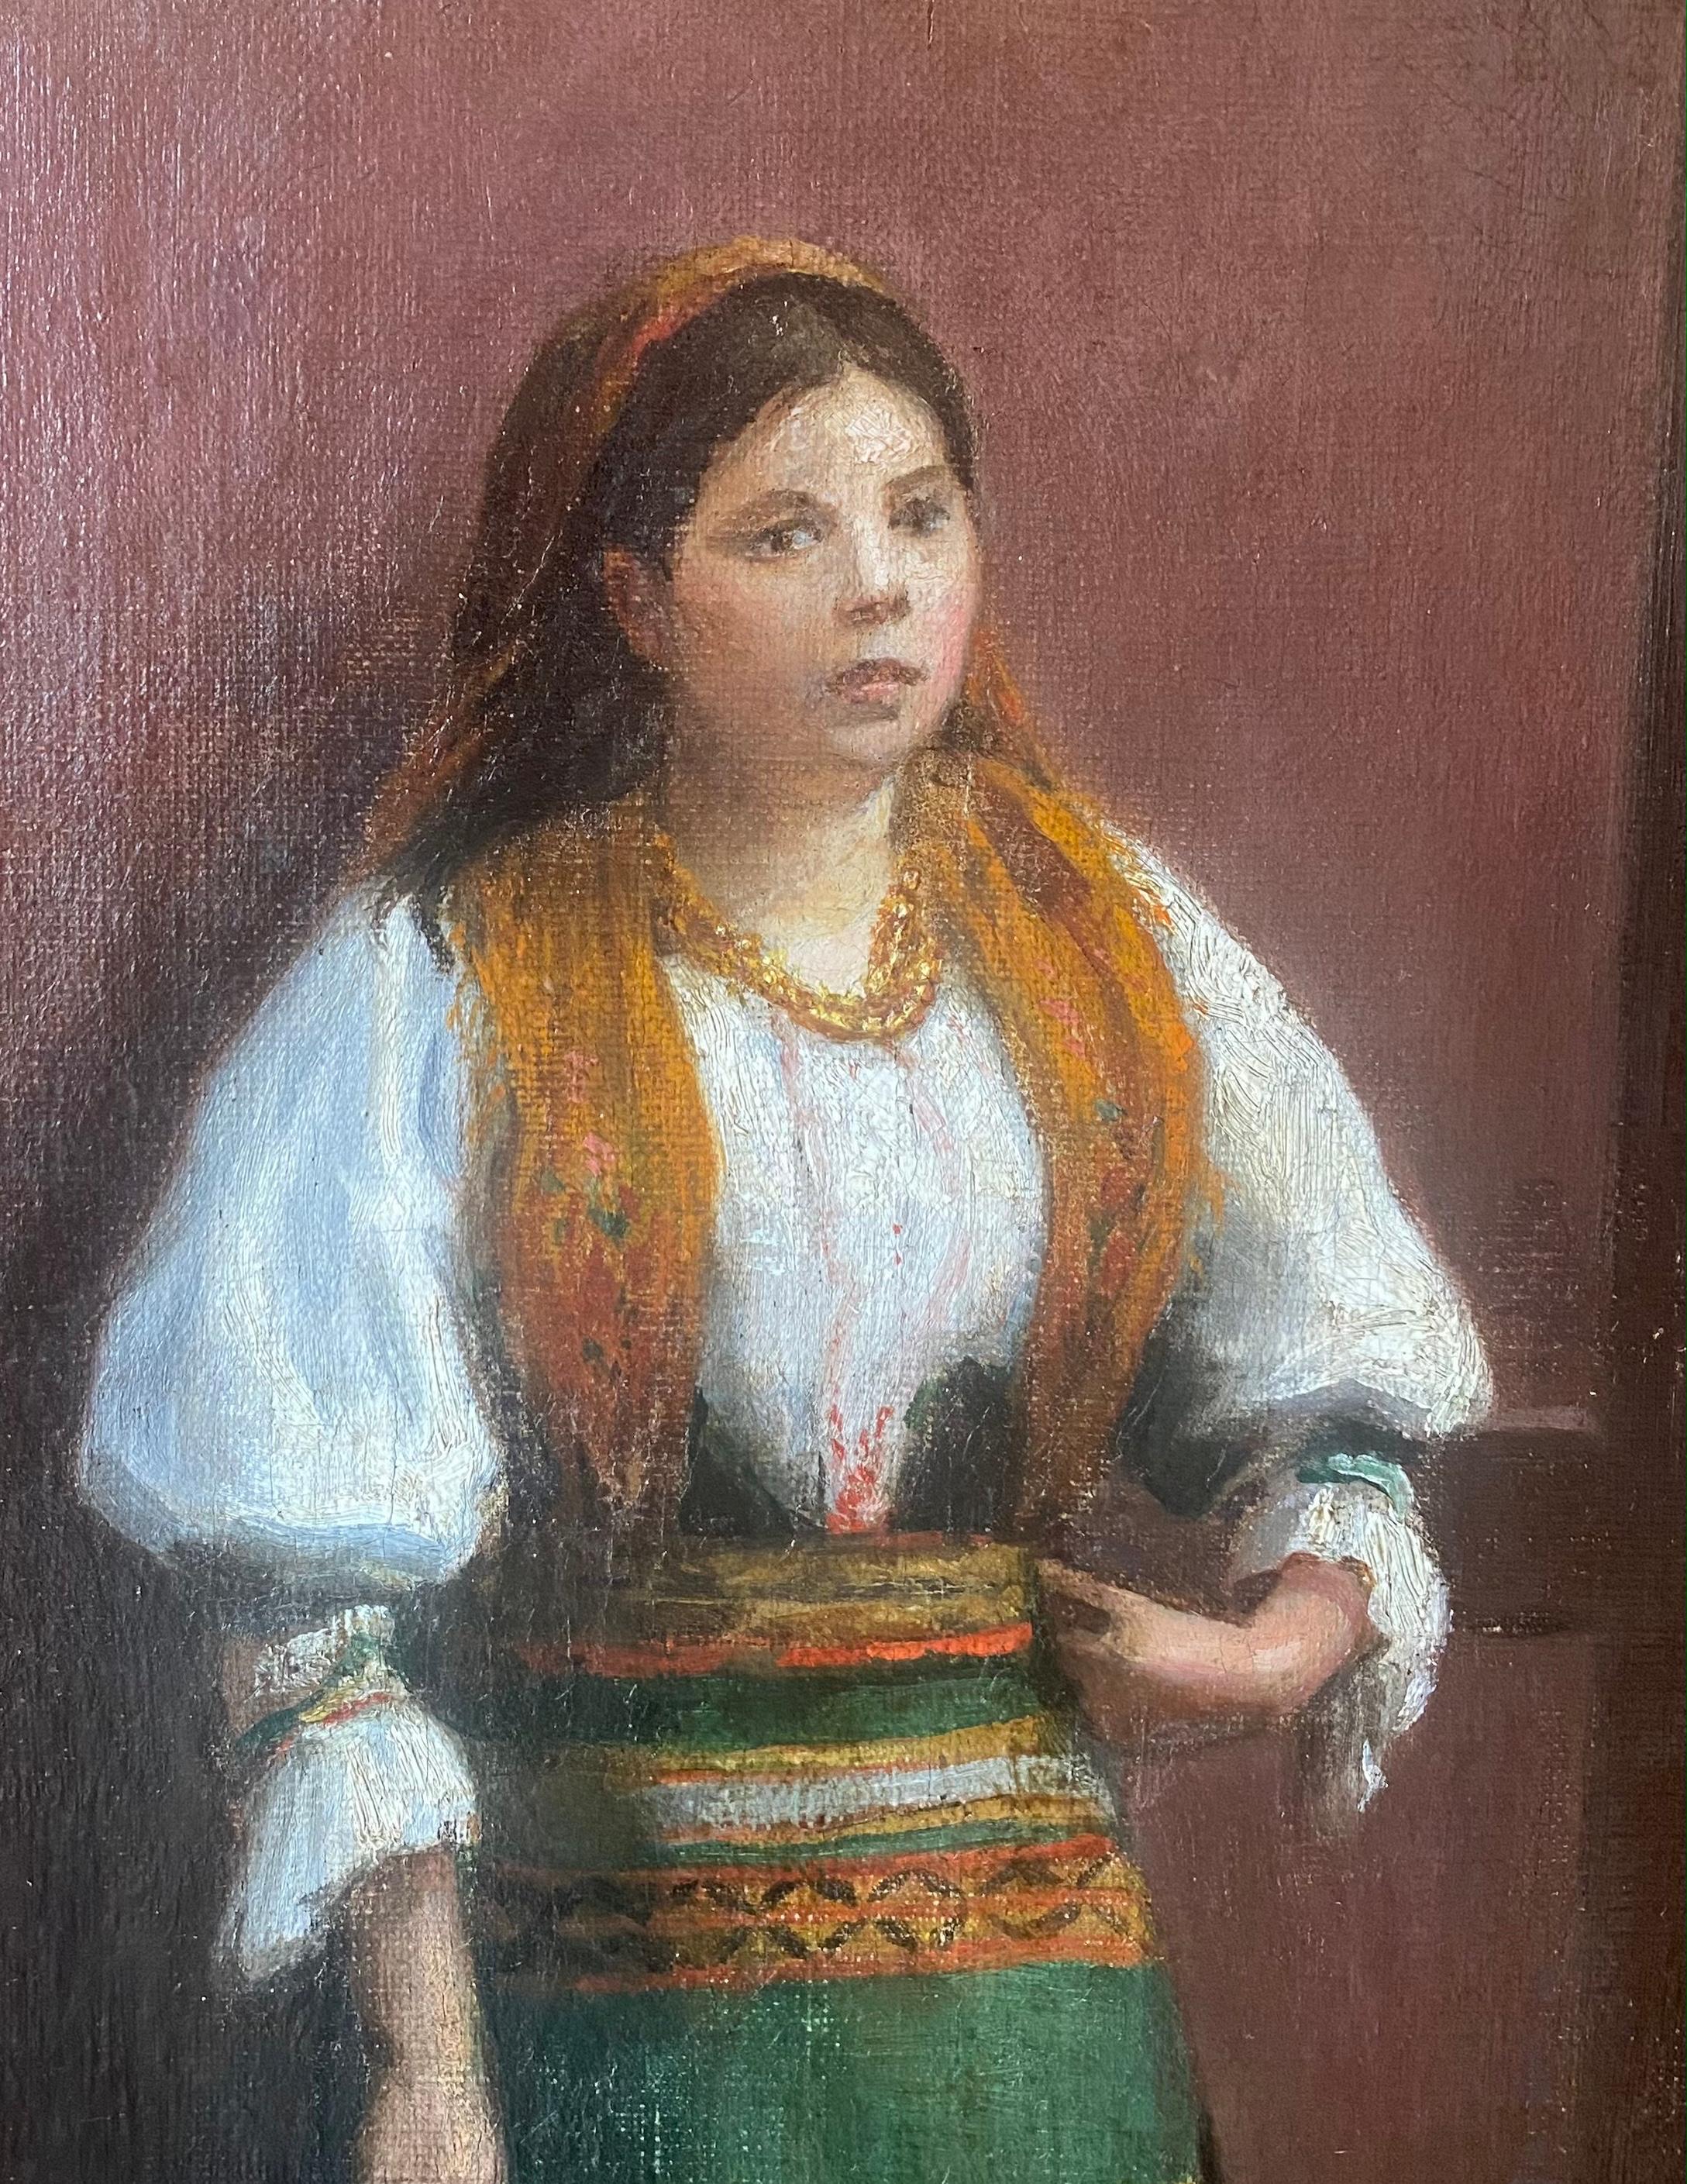 The first time model: the enigmatic young bohemian girl in traditional dress   - Académique Painting par Unknown